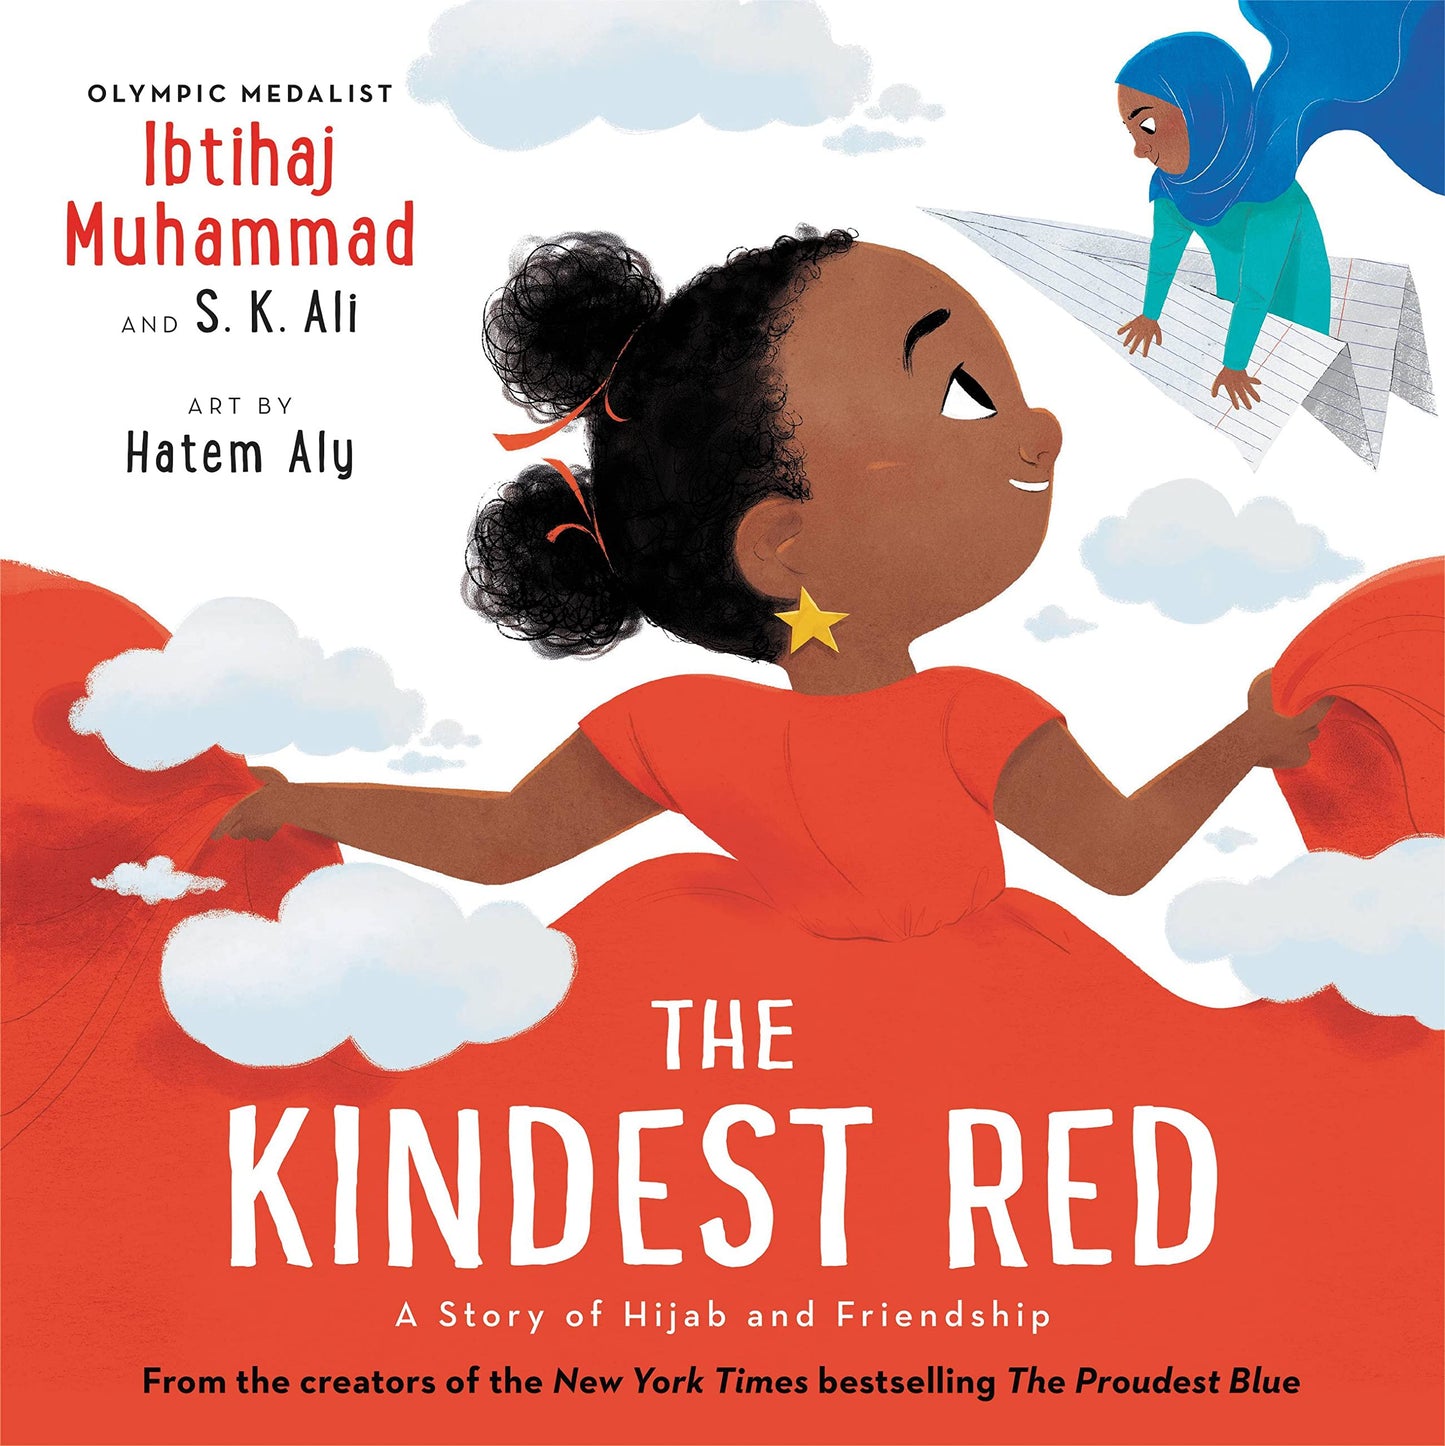 The Kindest Red // A Story of Hijab and Friendship